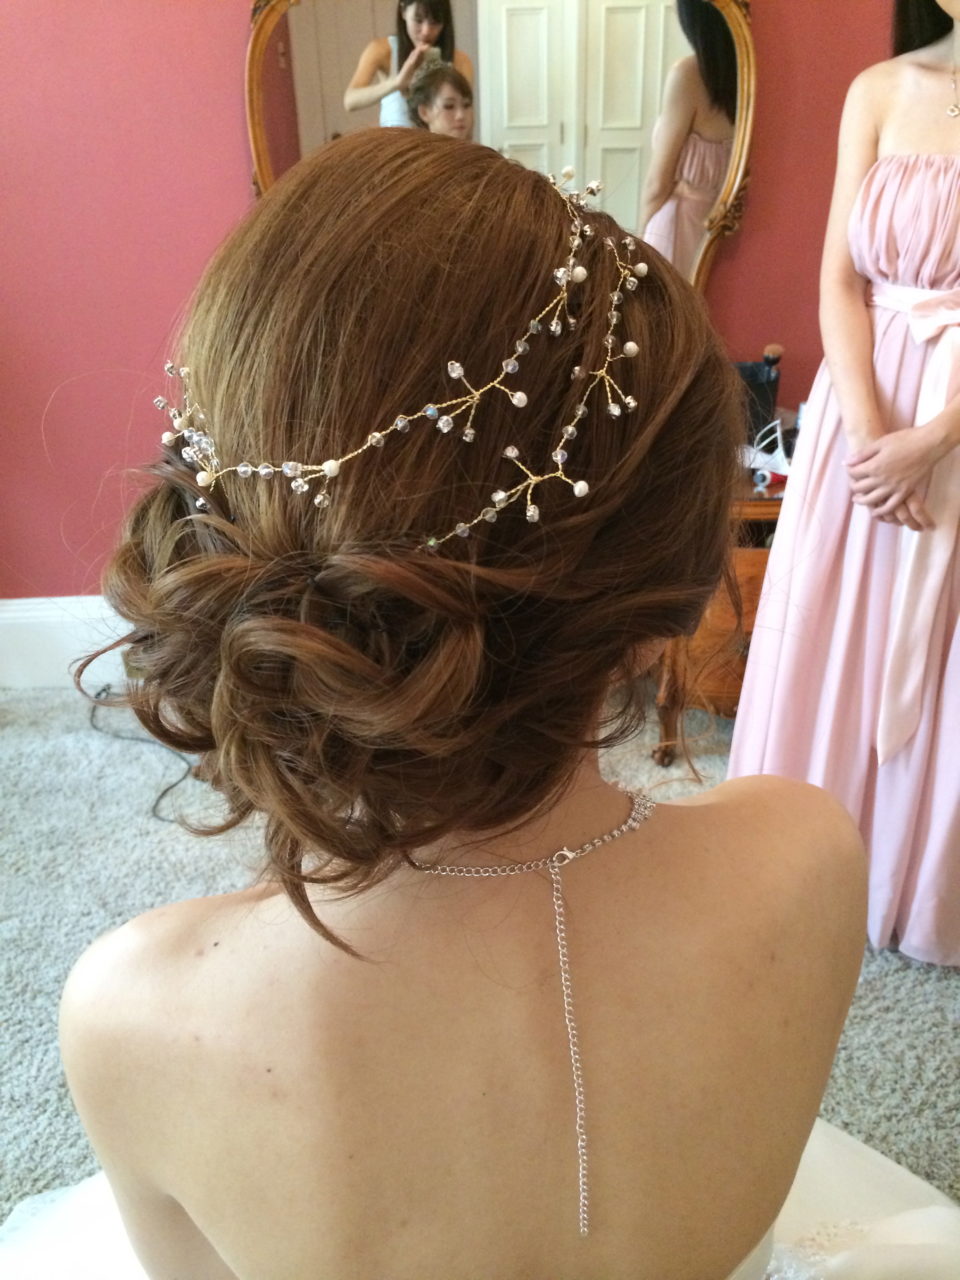 A side back looks of a wavy low crawl, pairing with delicate accessory.